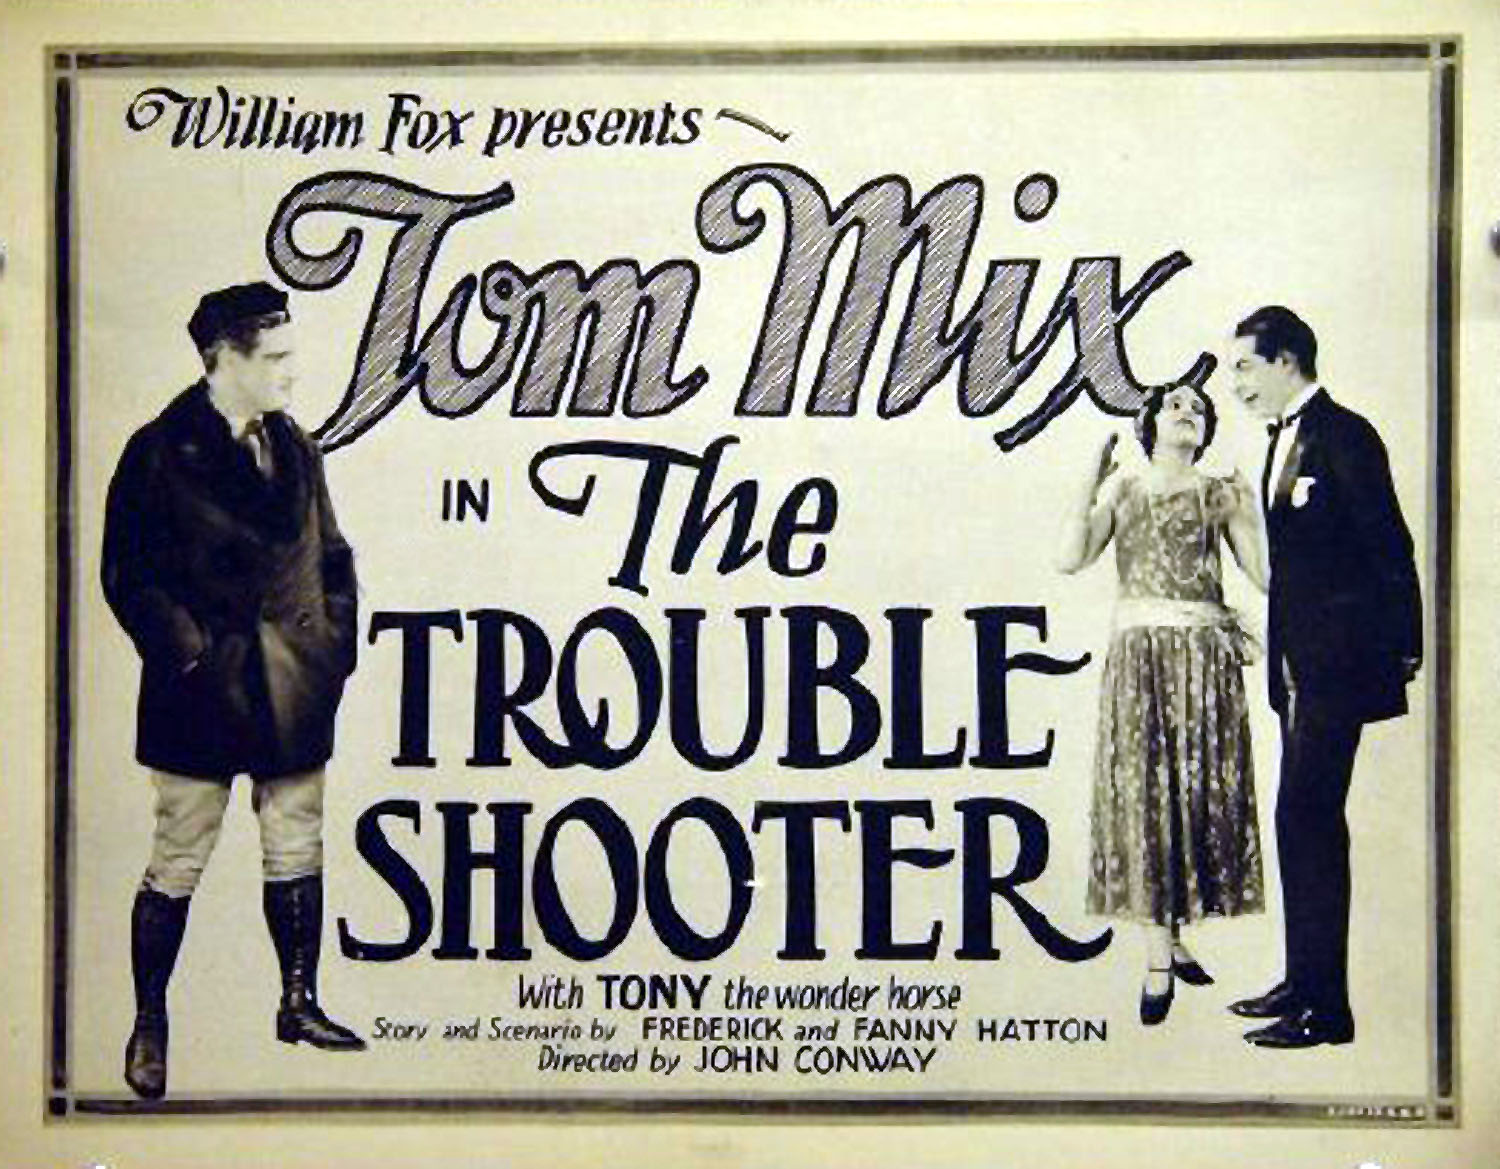 TROUBLE SHOOTER, THE